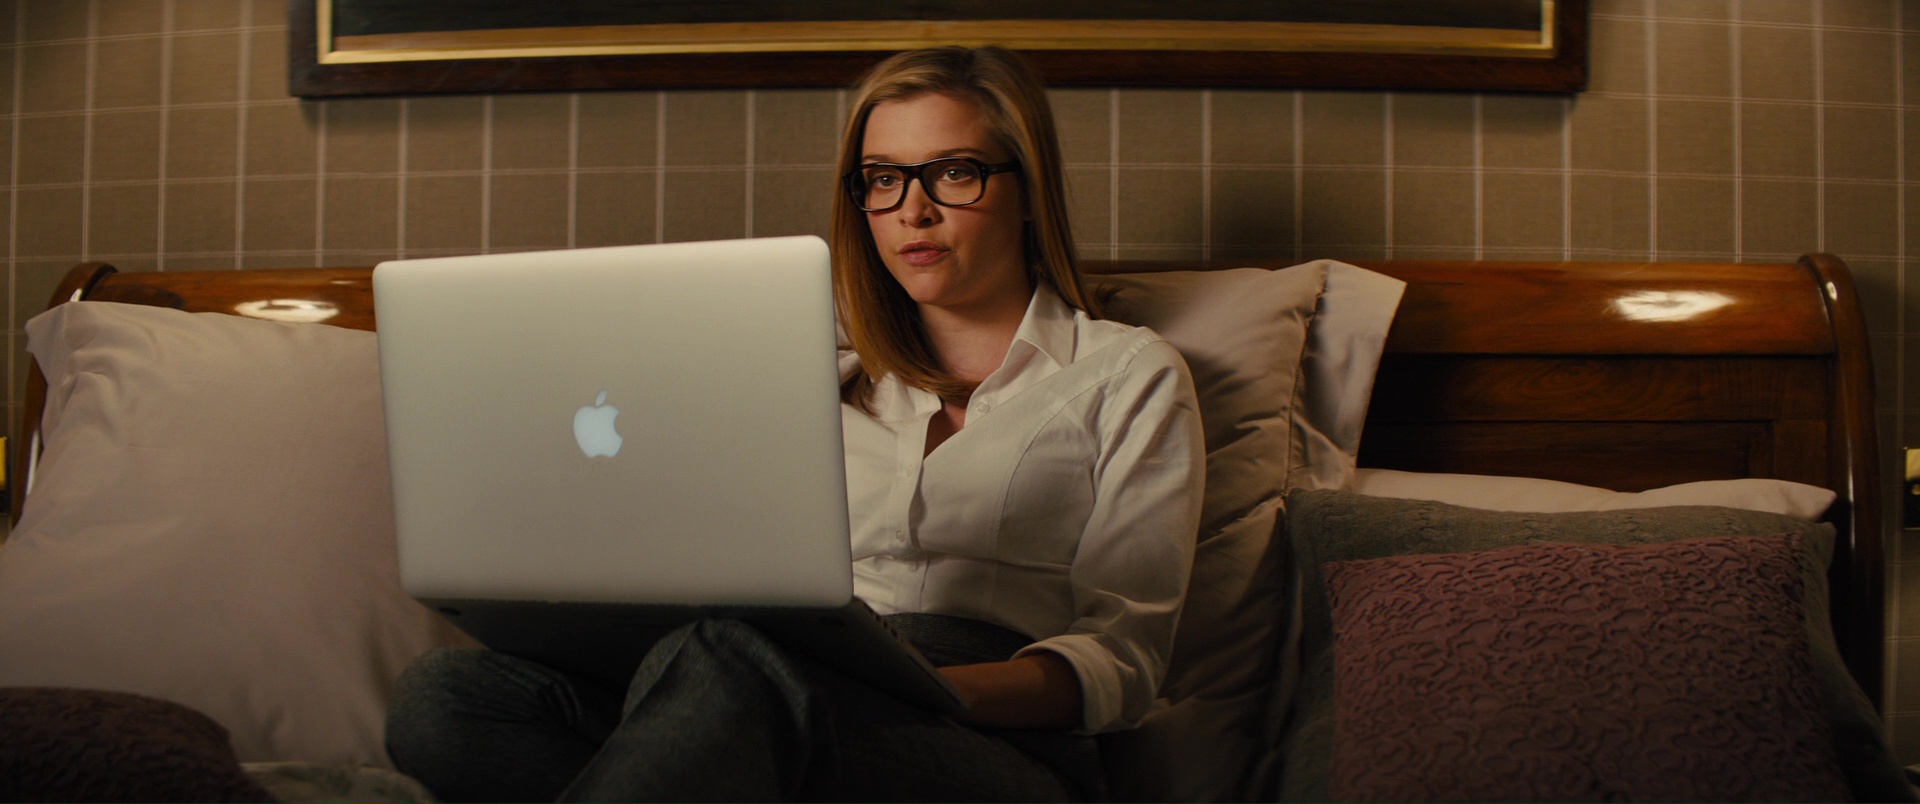 Apple Macbook Pro Notebook Used By Sophie Cookson In Kingsman 2 The Externa...